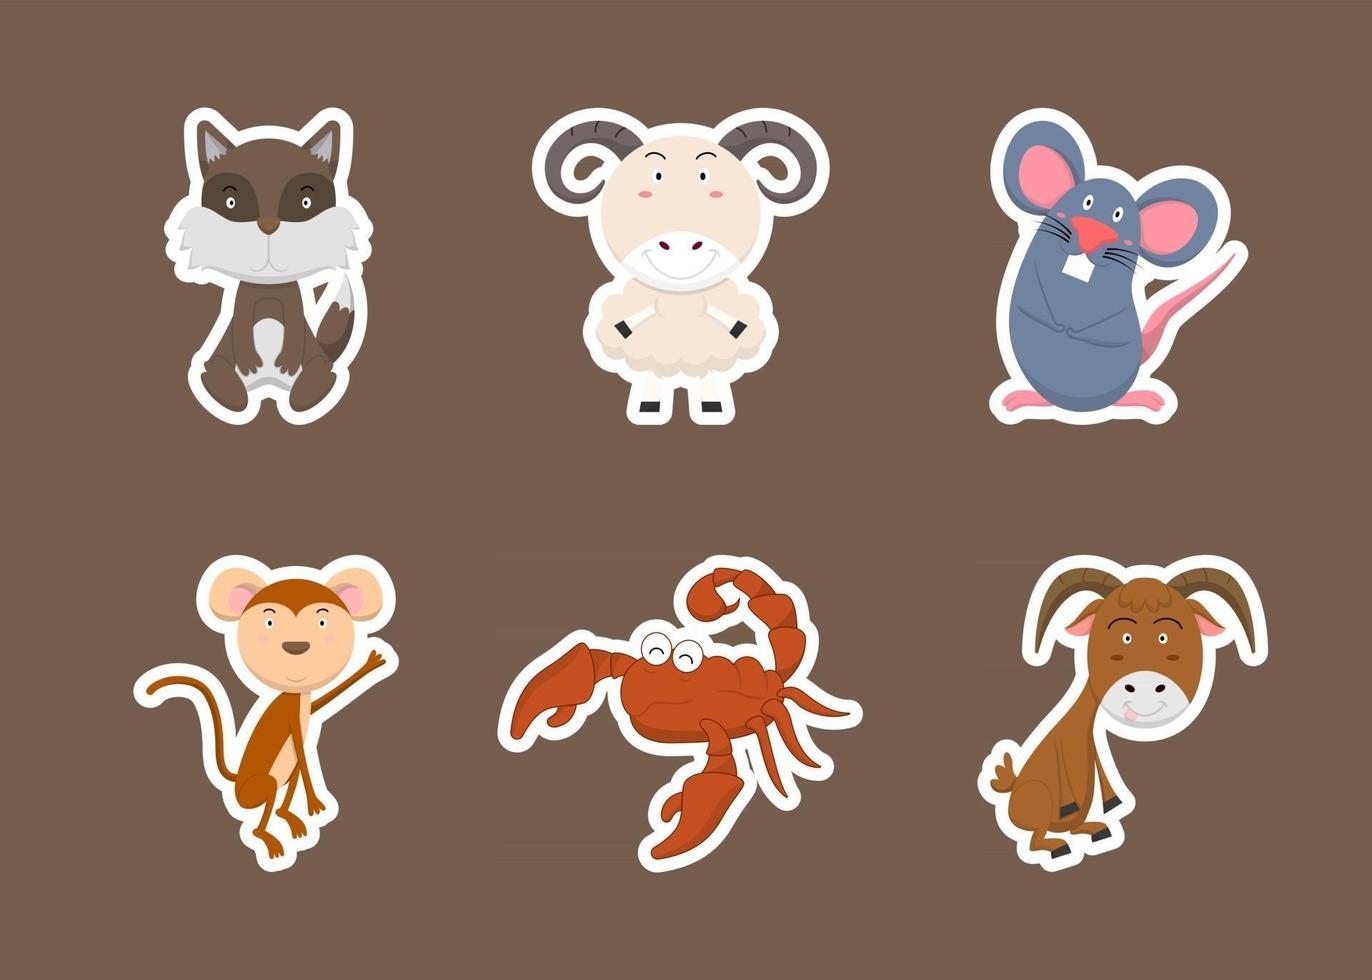 Colorful set of cute farm animals and objects, vector stickers with domestic animals